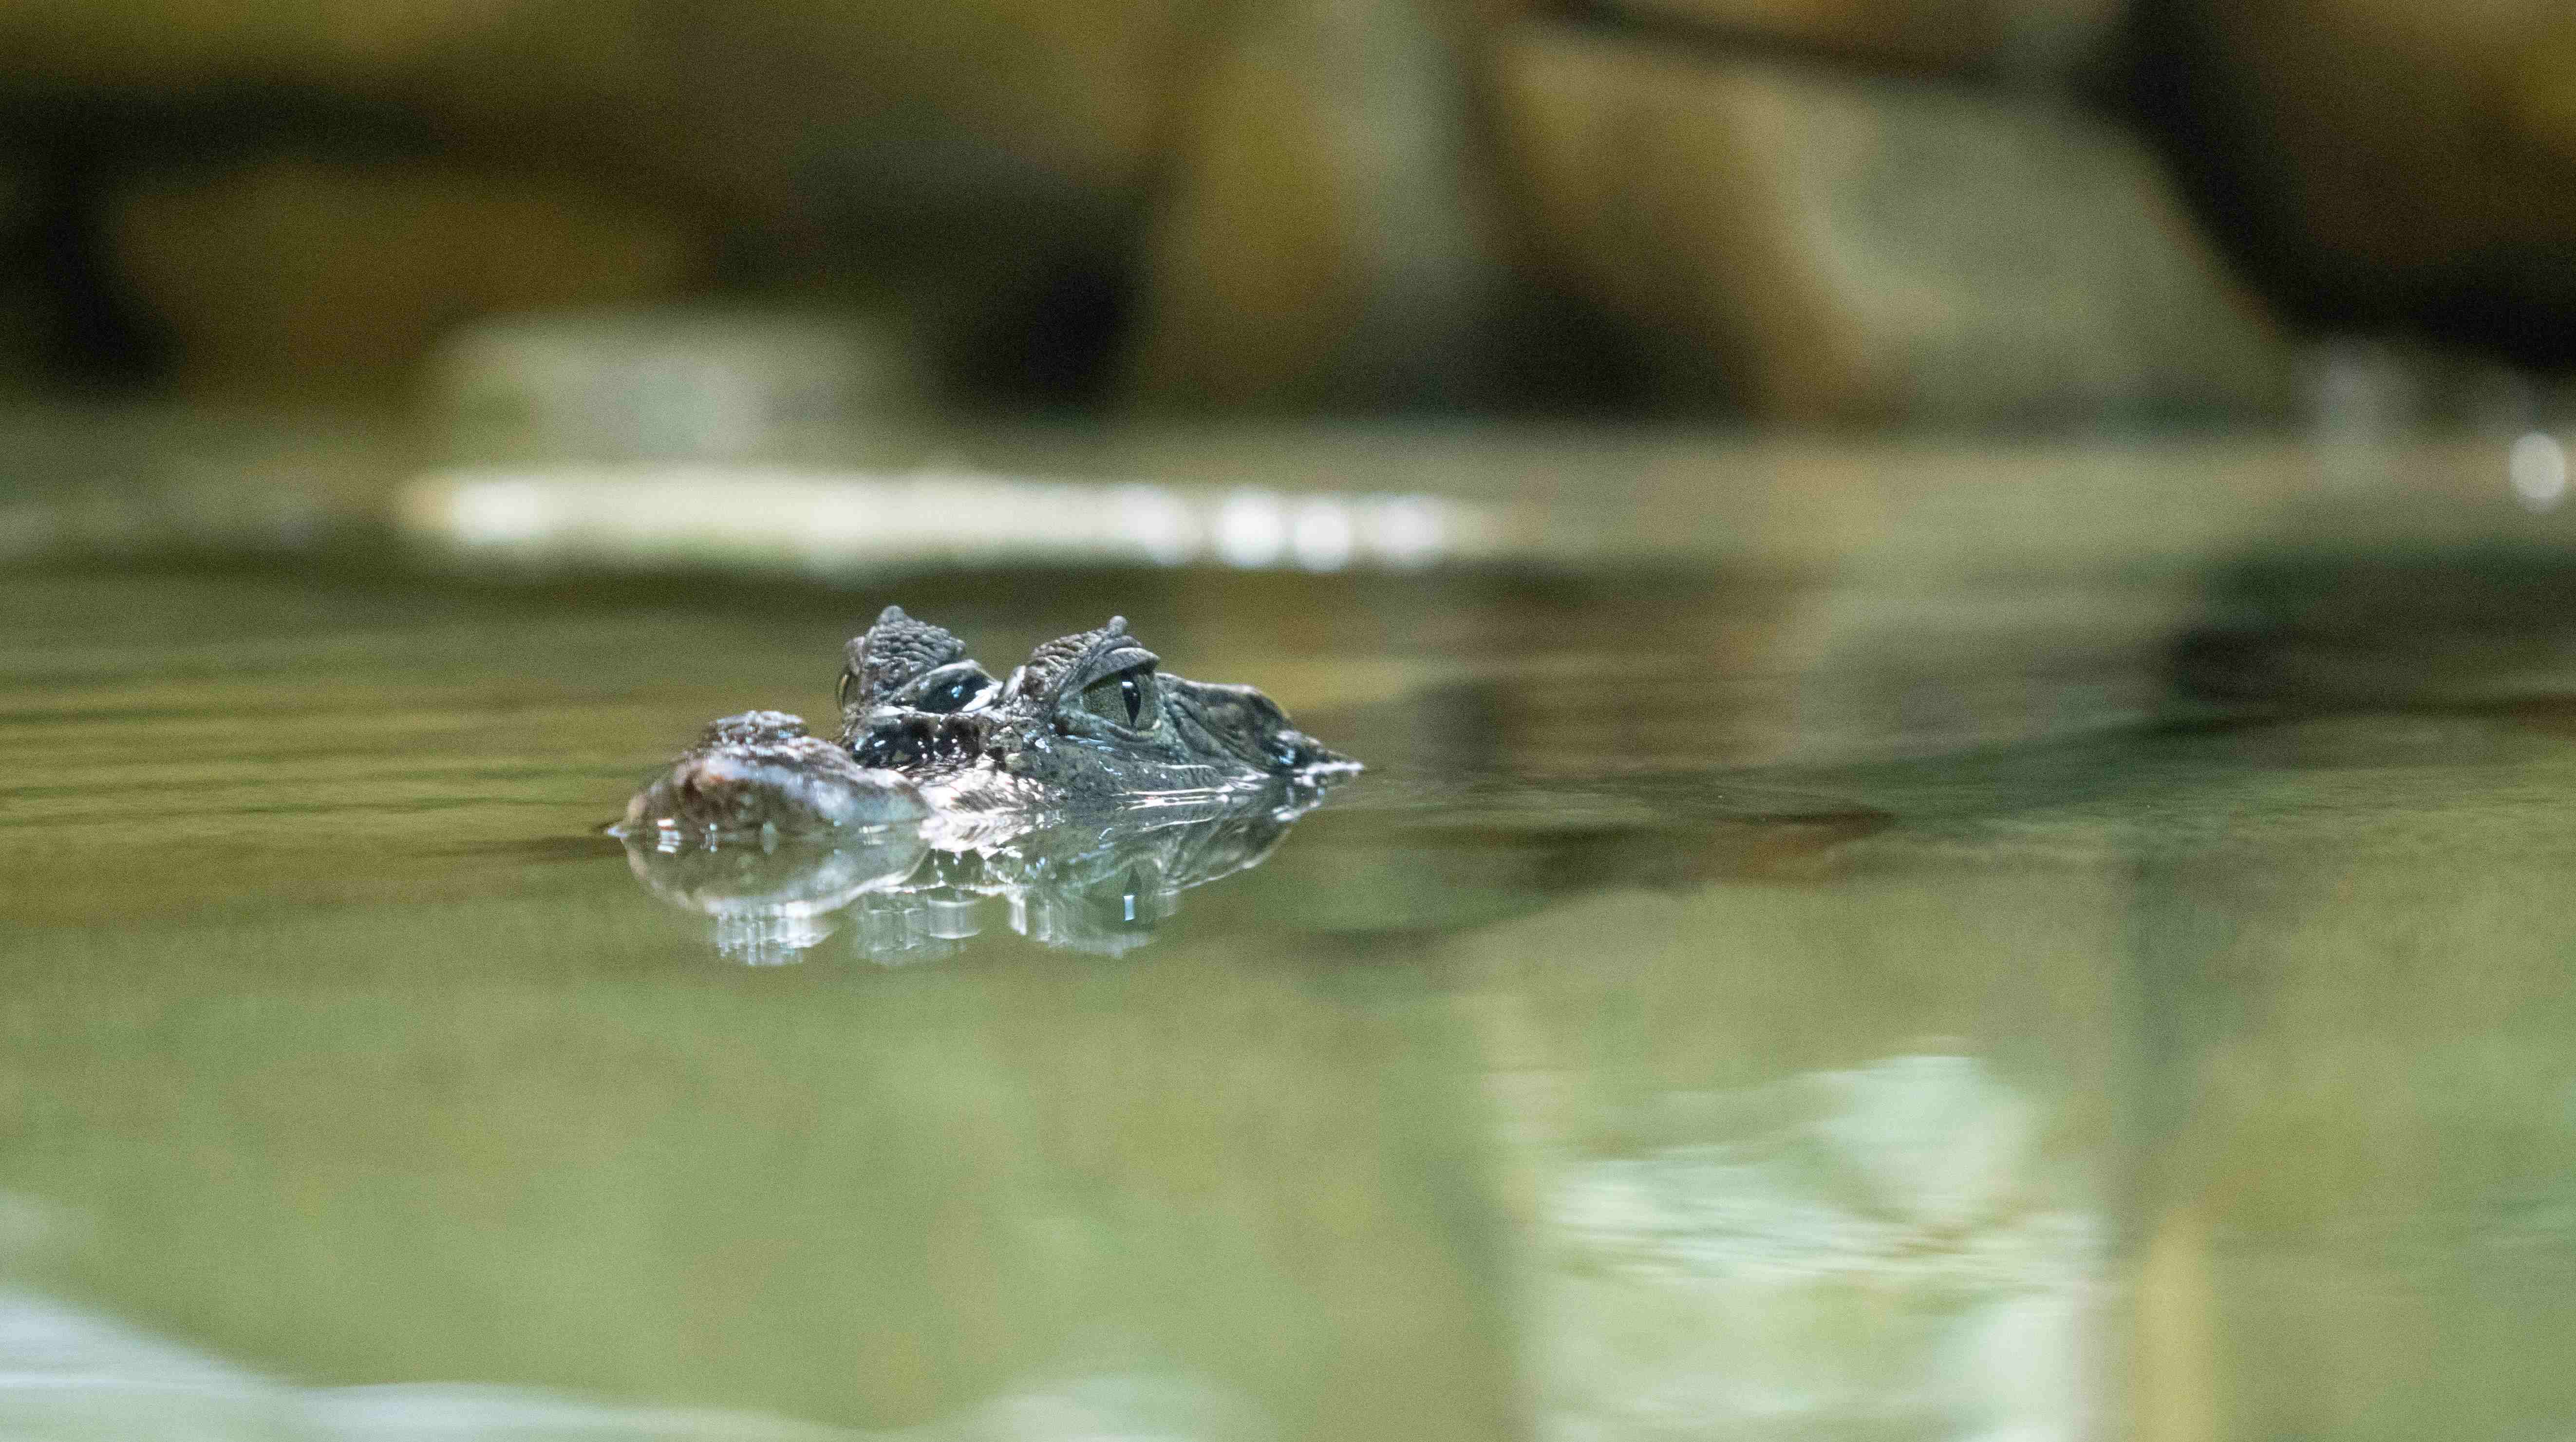 Stratford Butterfly Farm opens new ‘rainforest’ exhibition featuring a Crocodile!